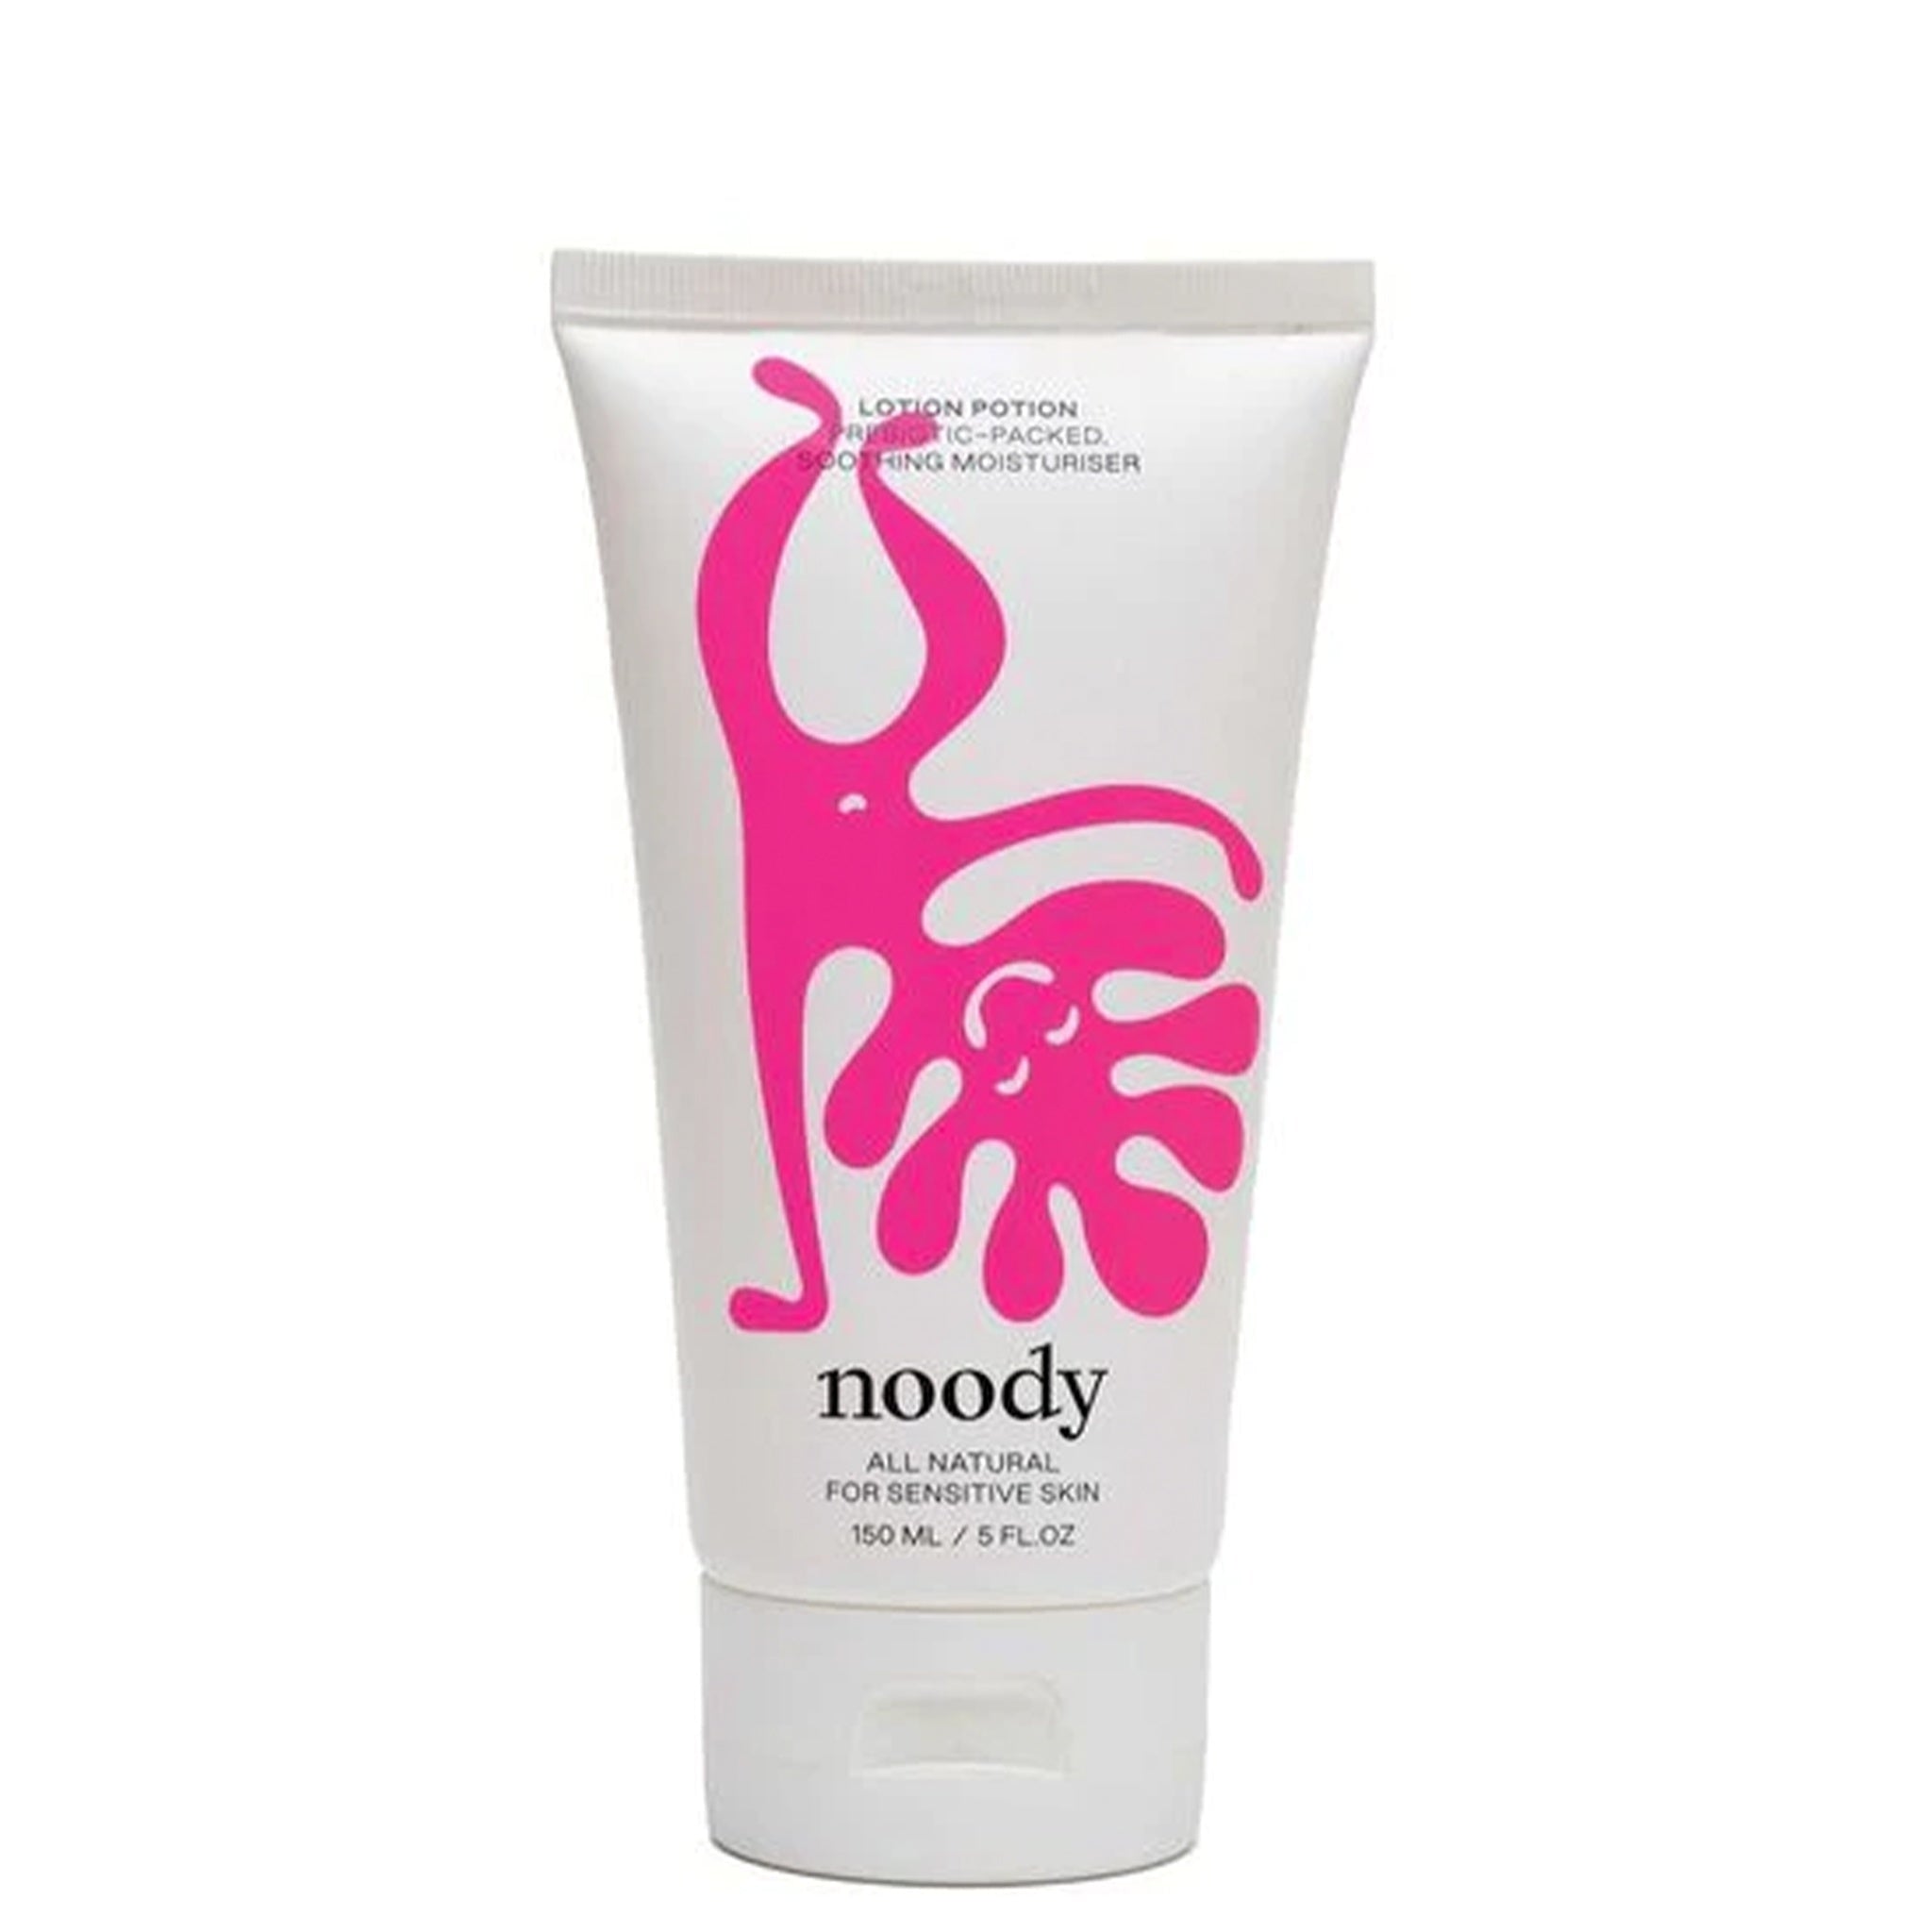 Noody Lotion Potion Soothing Moisturiser Baby Noody 